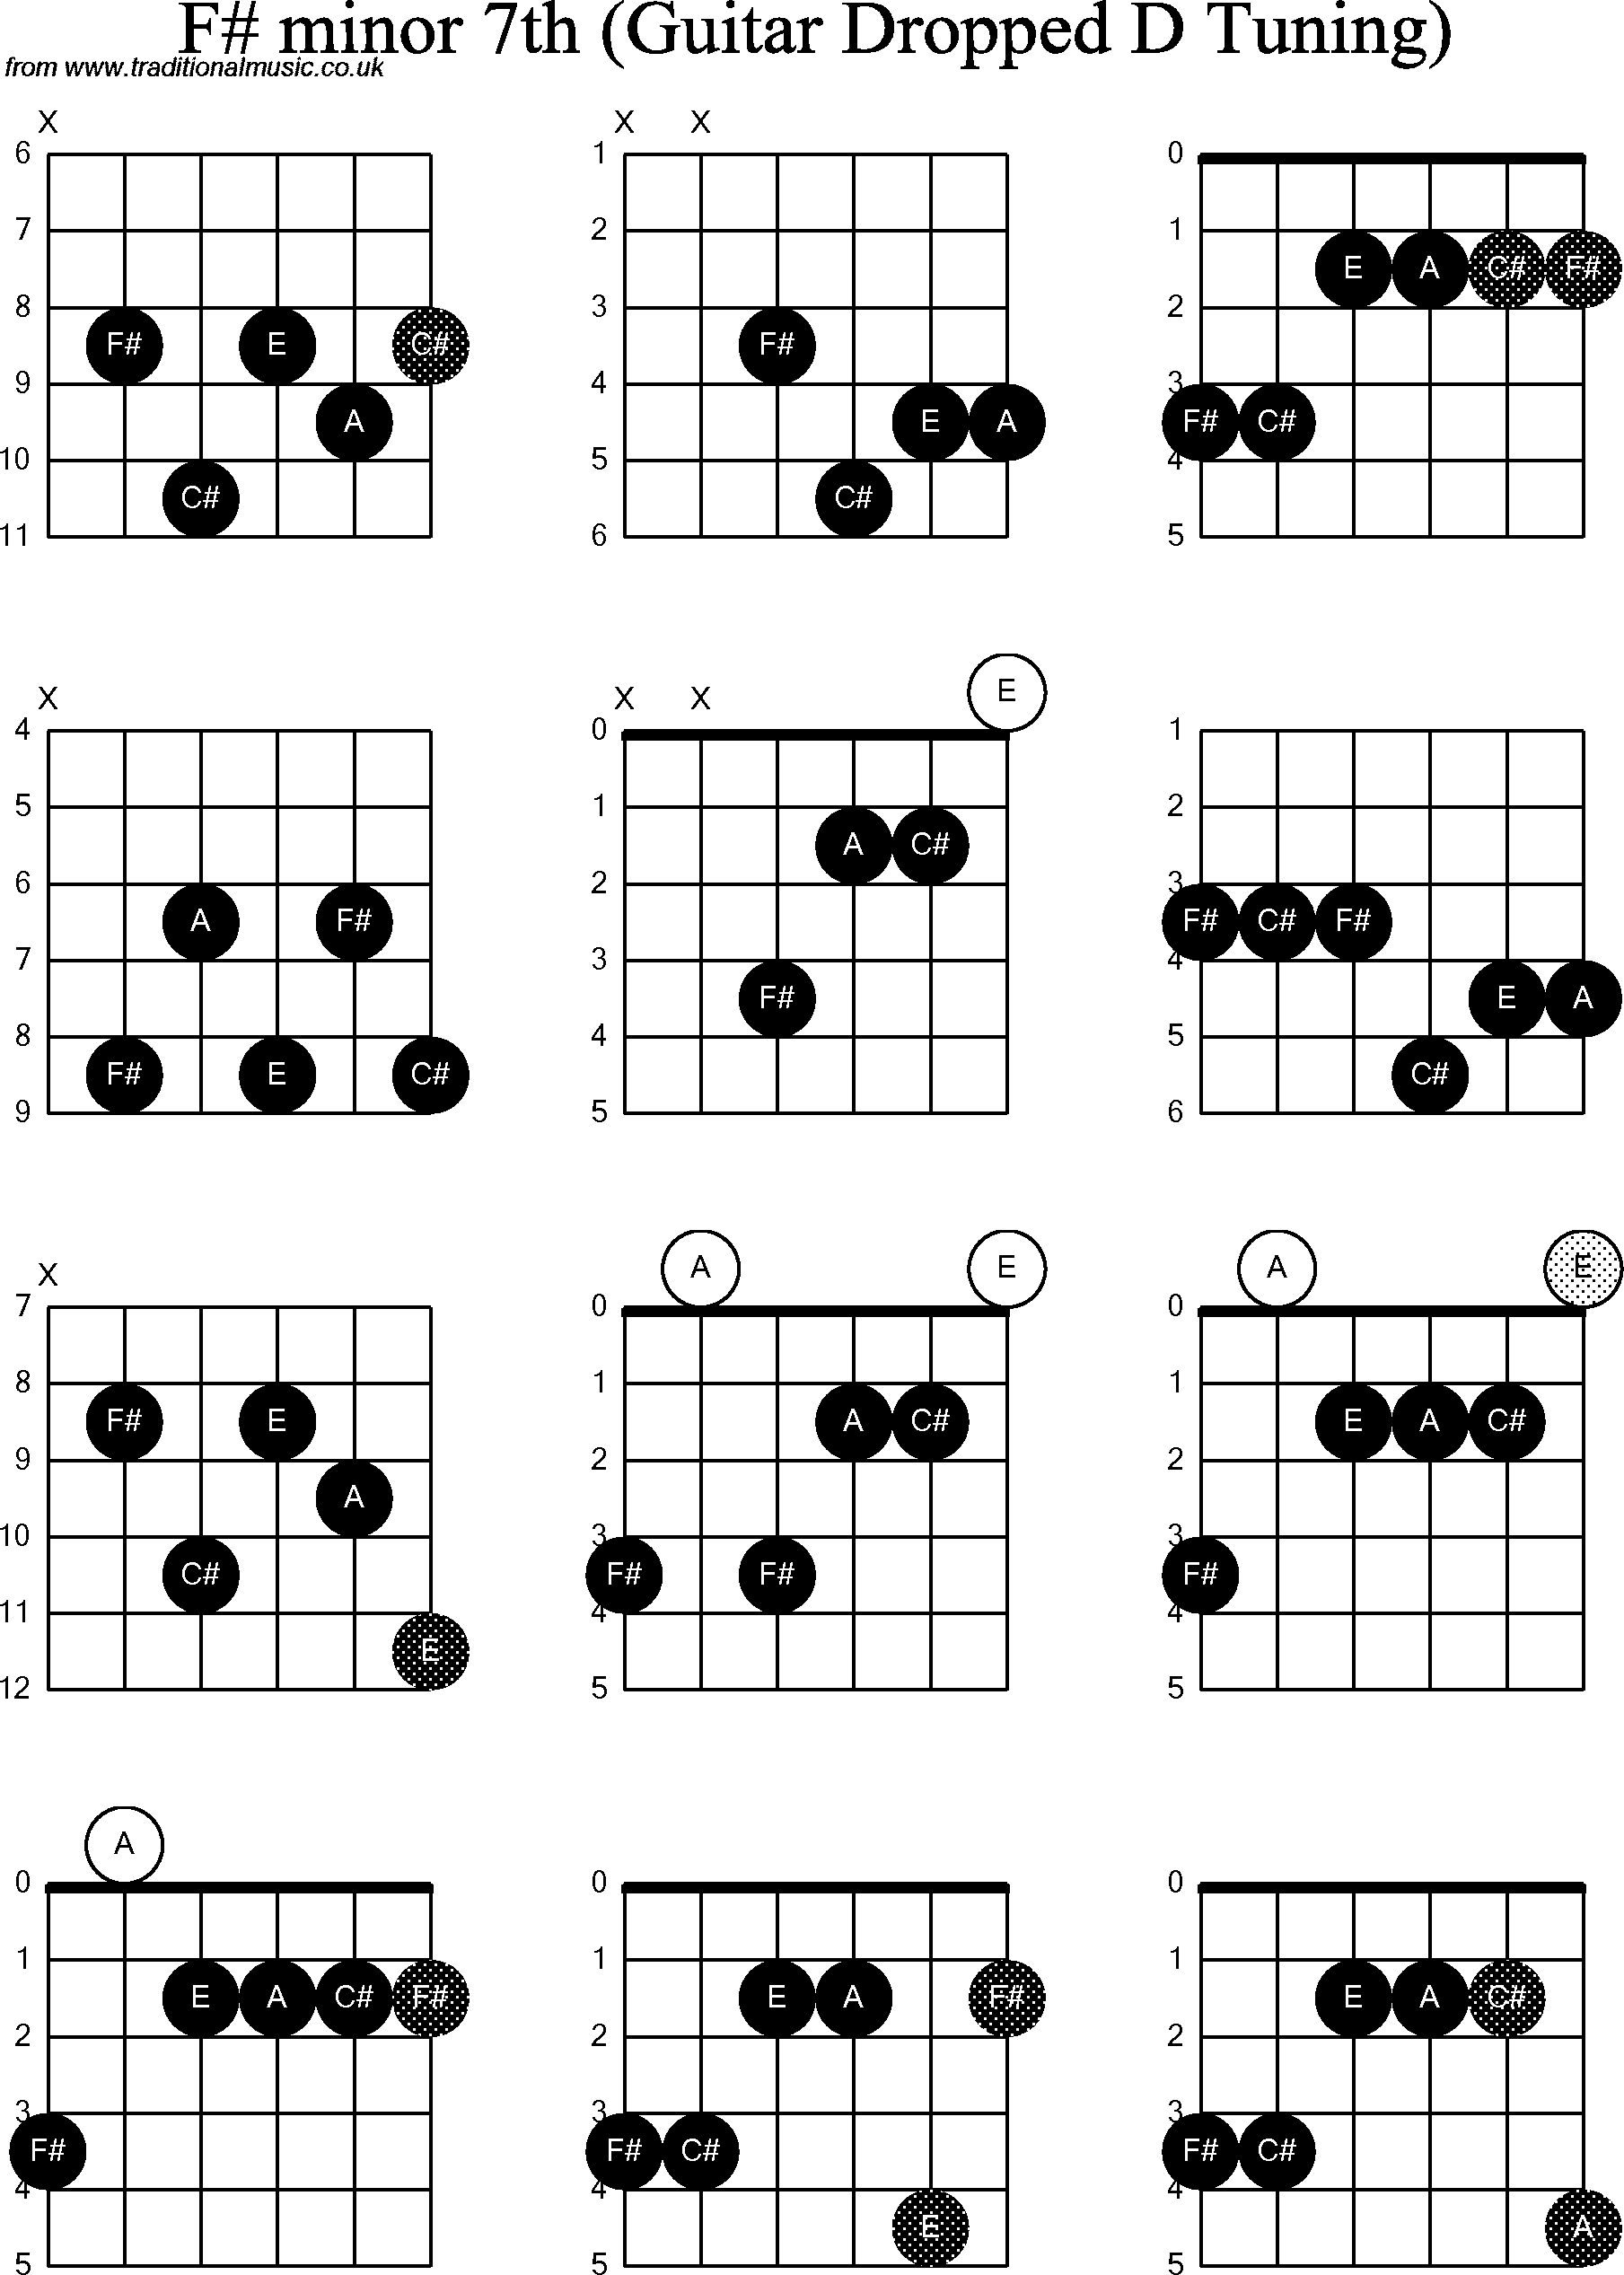 Chord diagrams for Dropped D Guitar(DADGBE), Eb Diminished